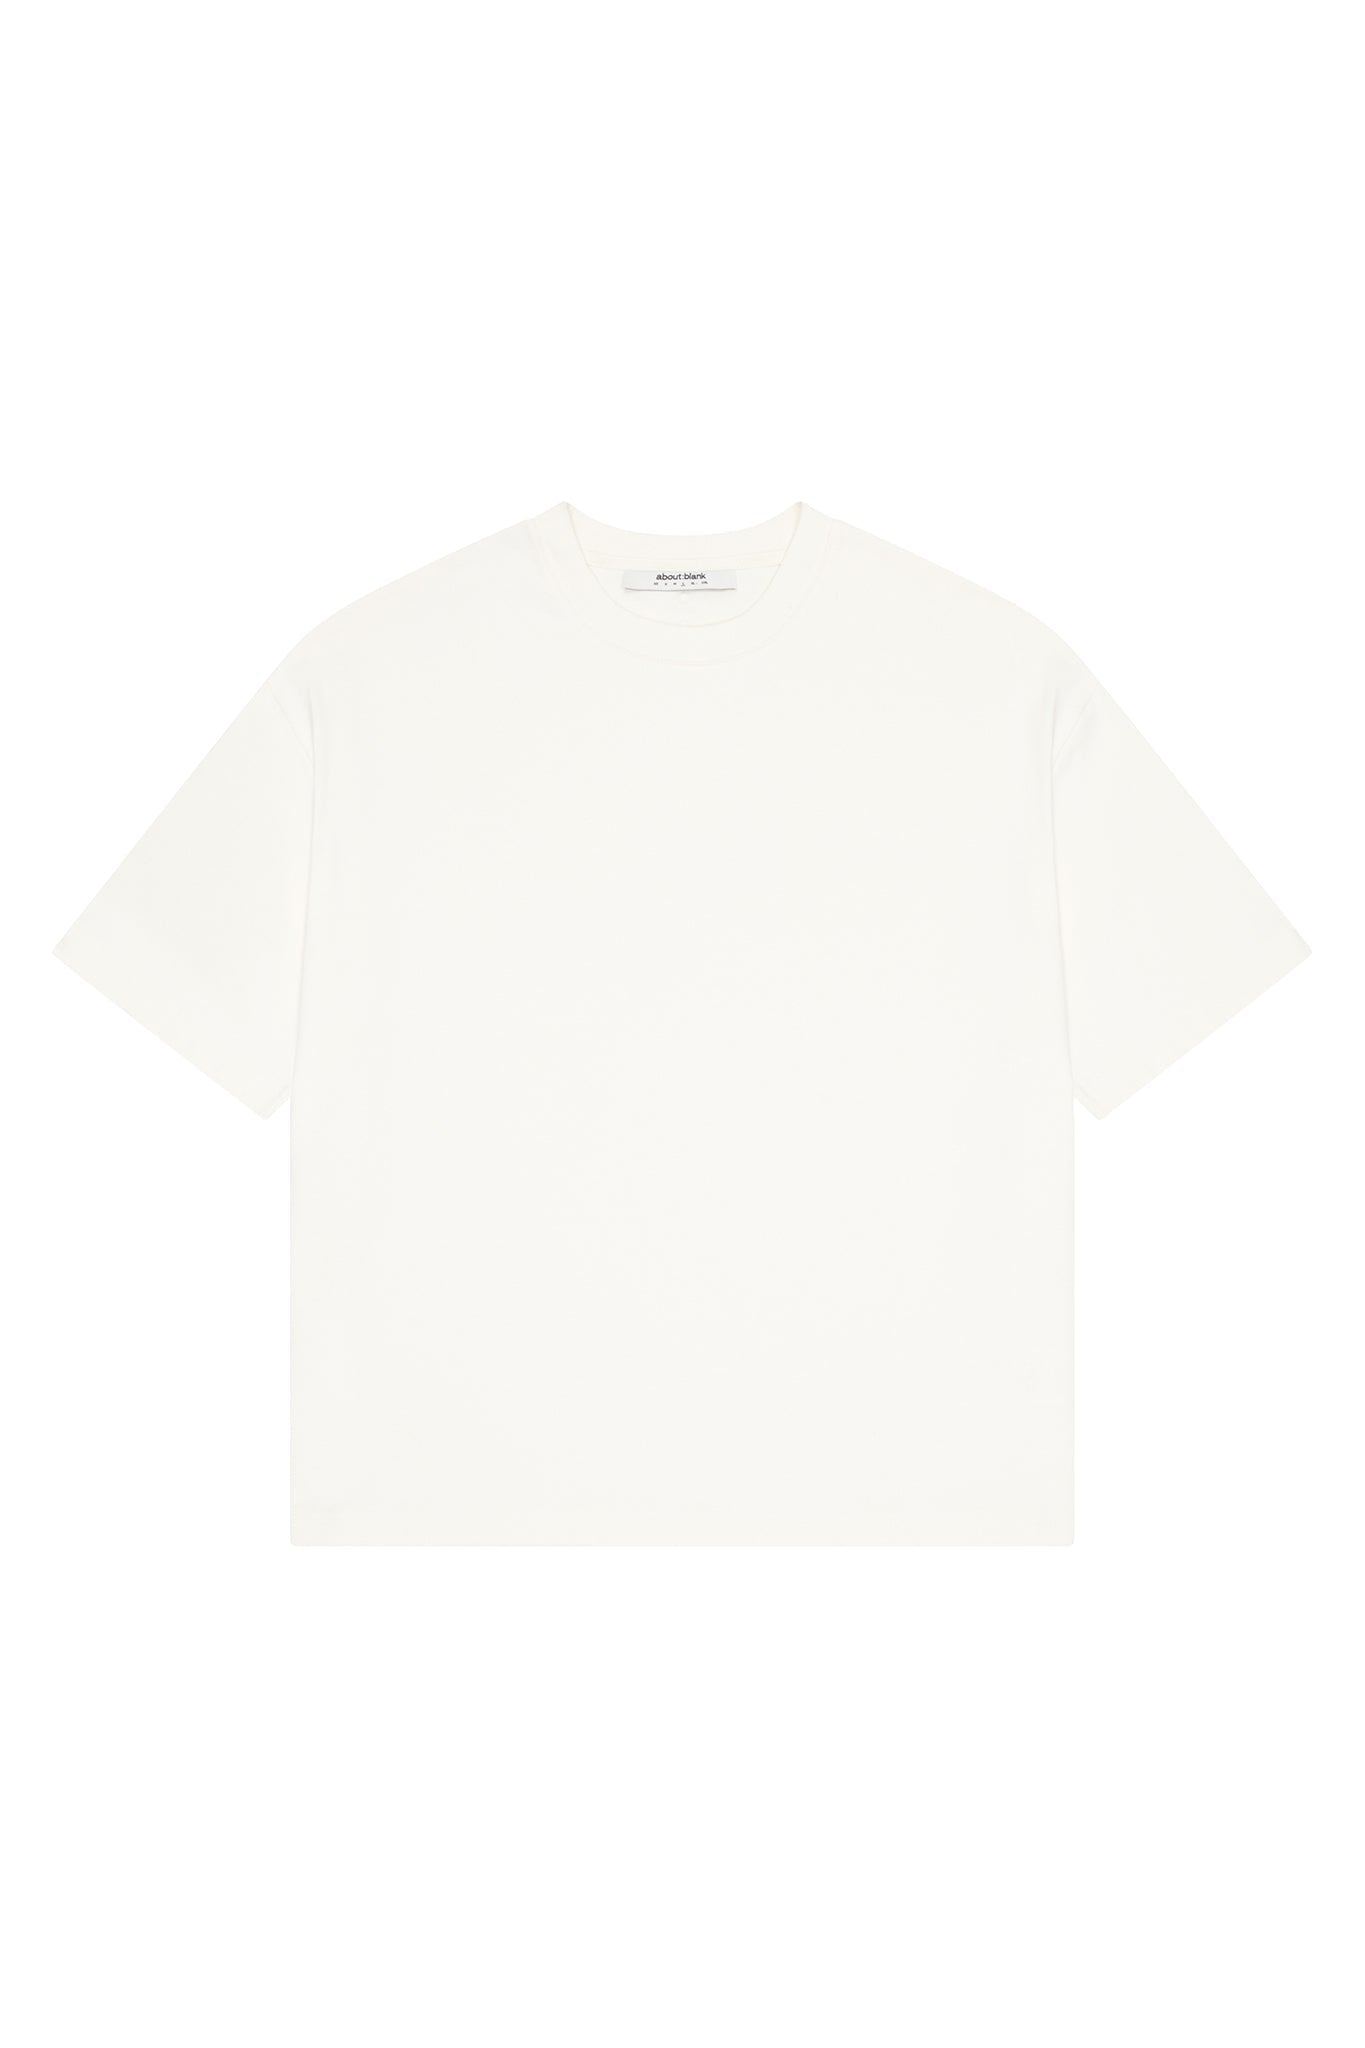 about---blank.comblank box t-shirt oat